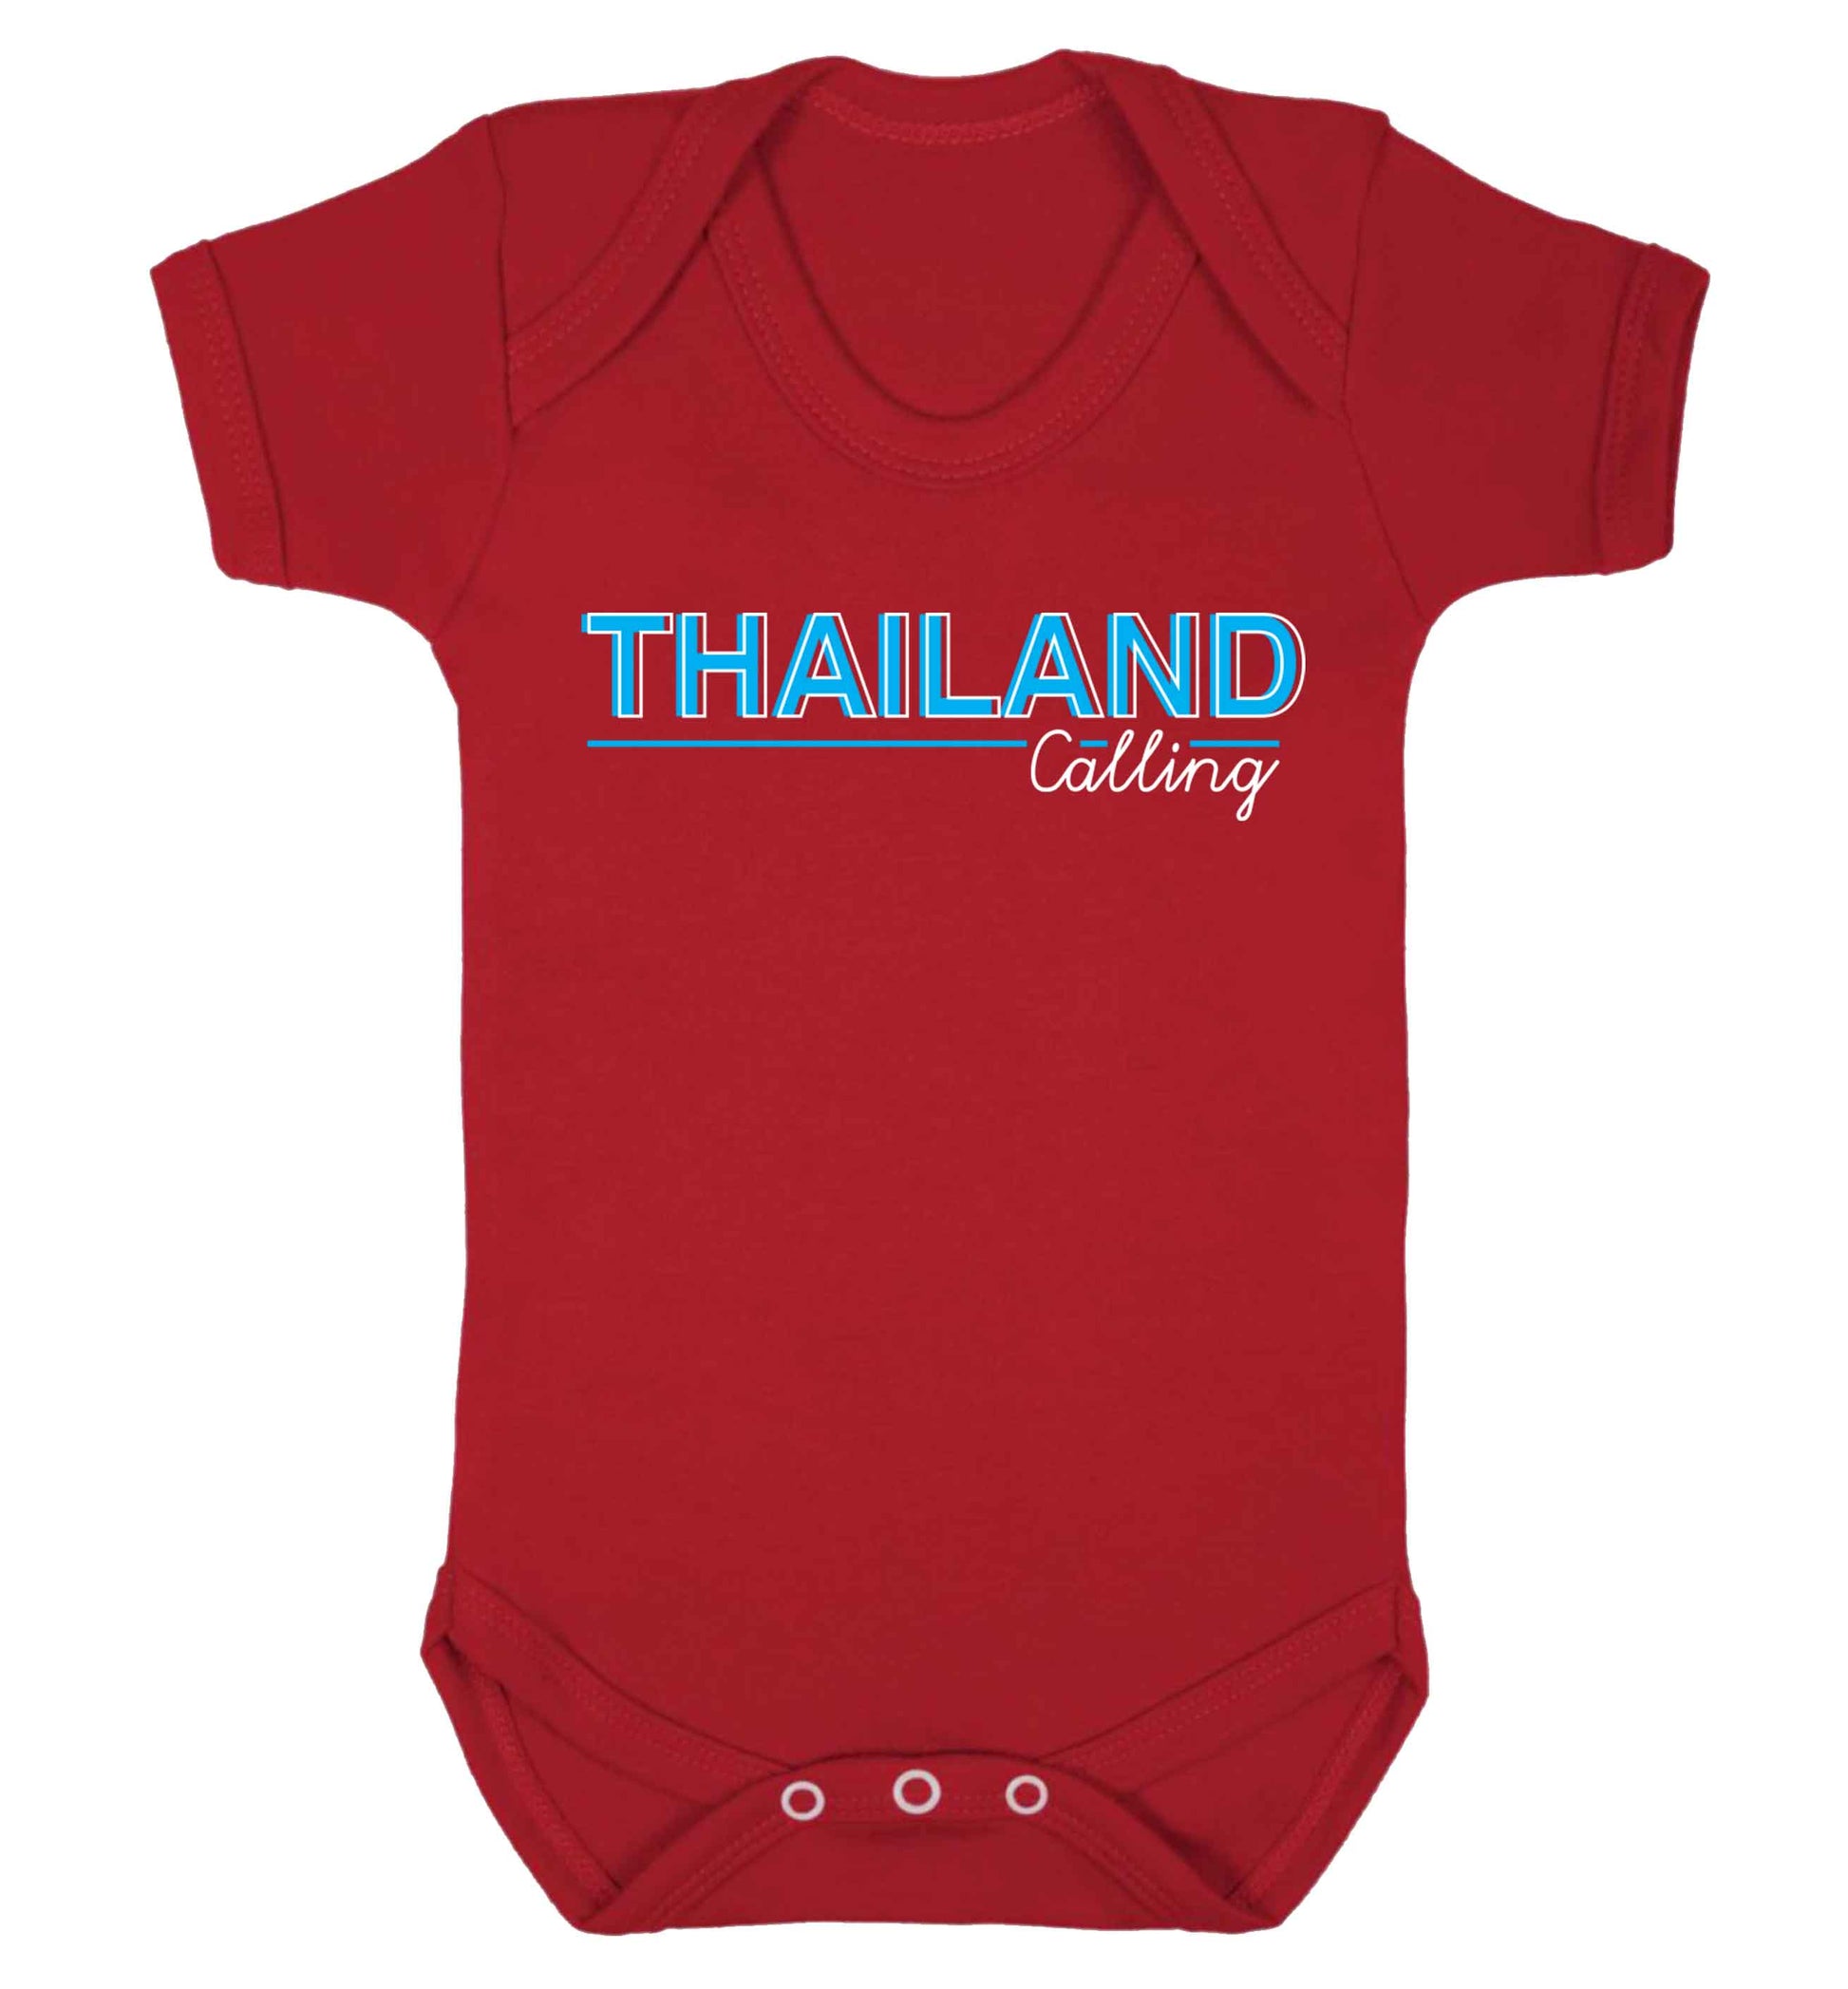 Thailand calling Baby Vest red 18-24 months